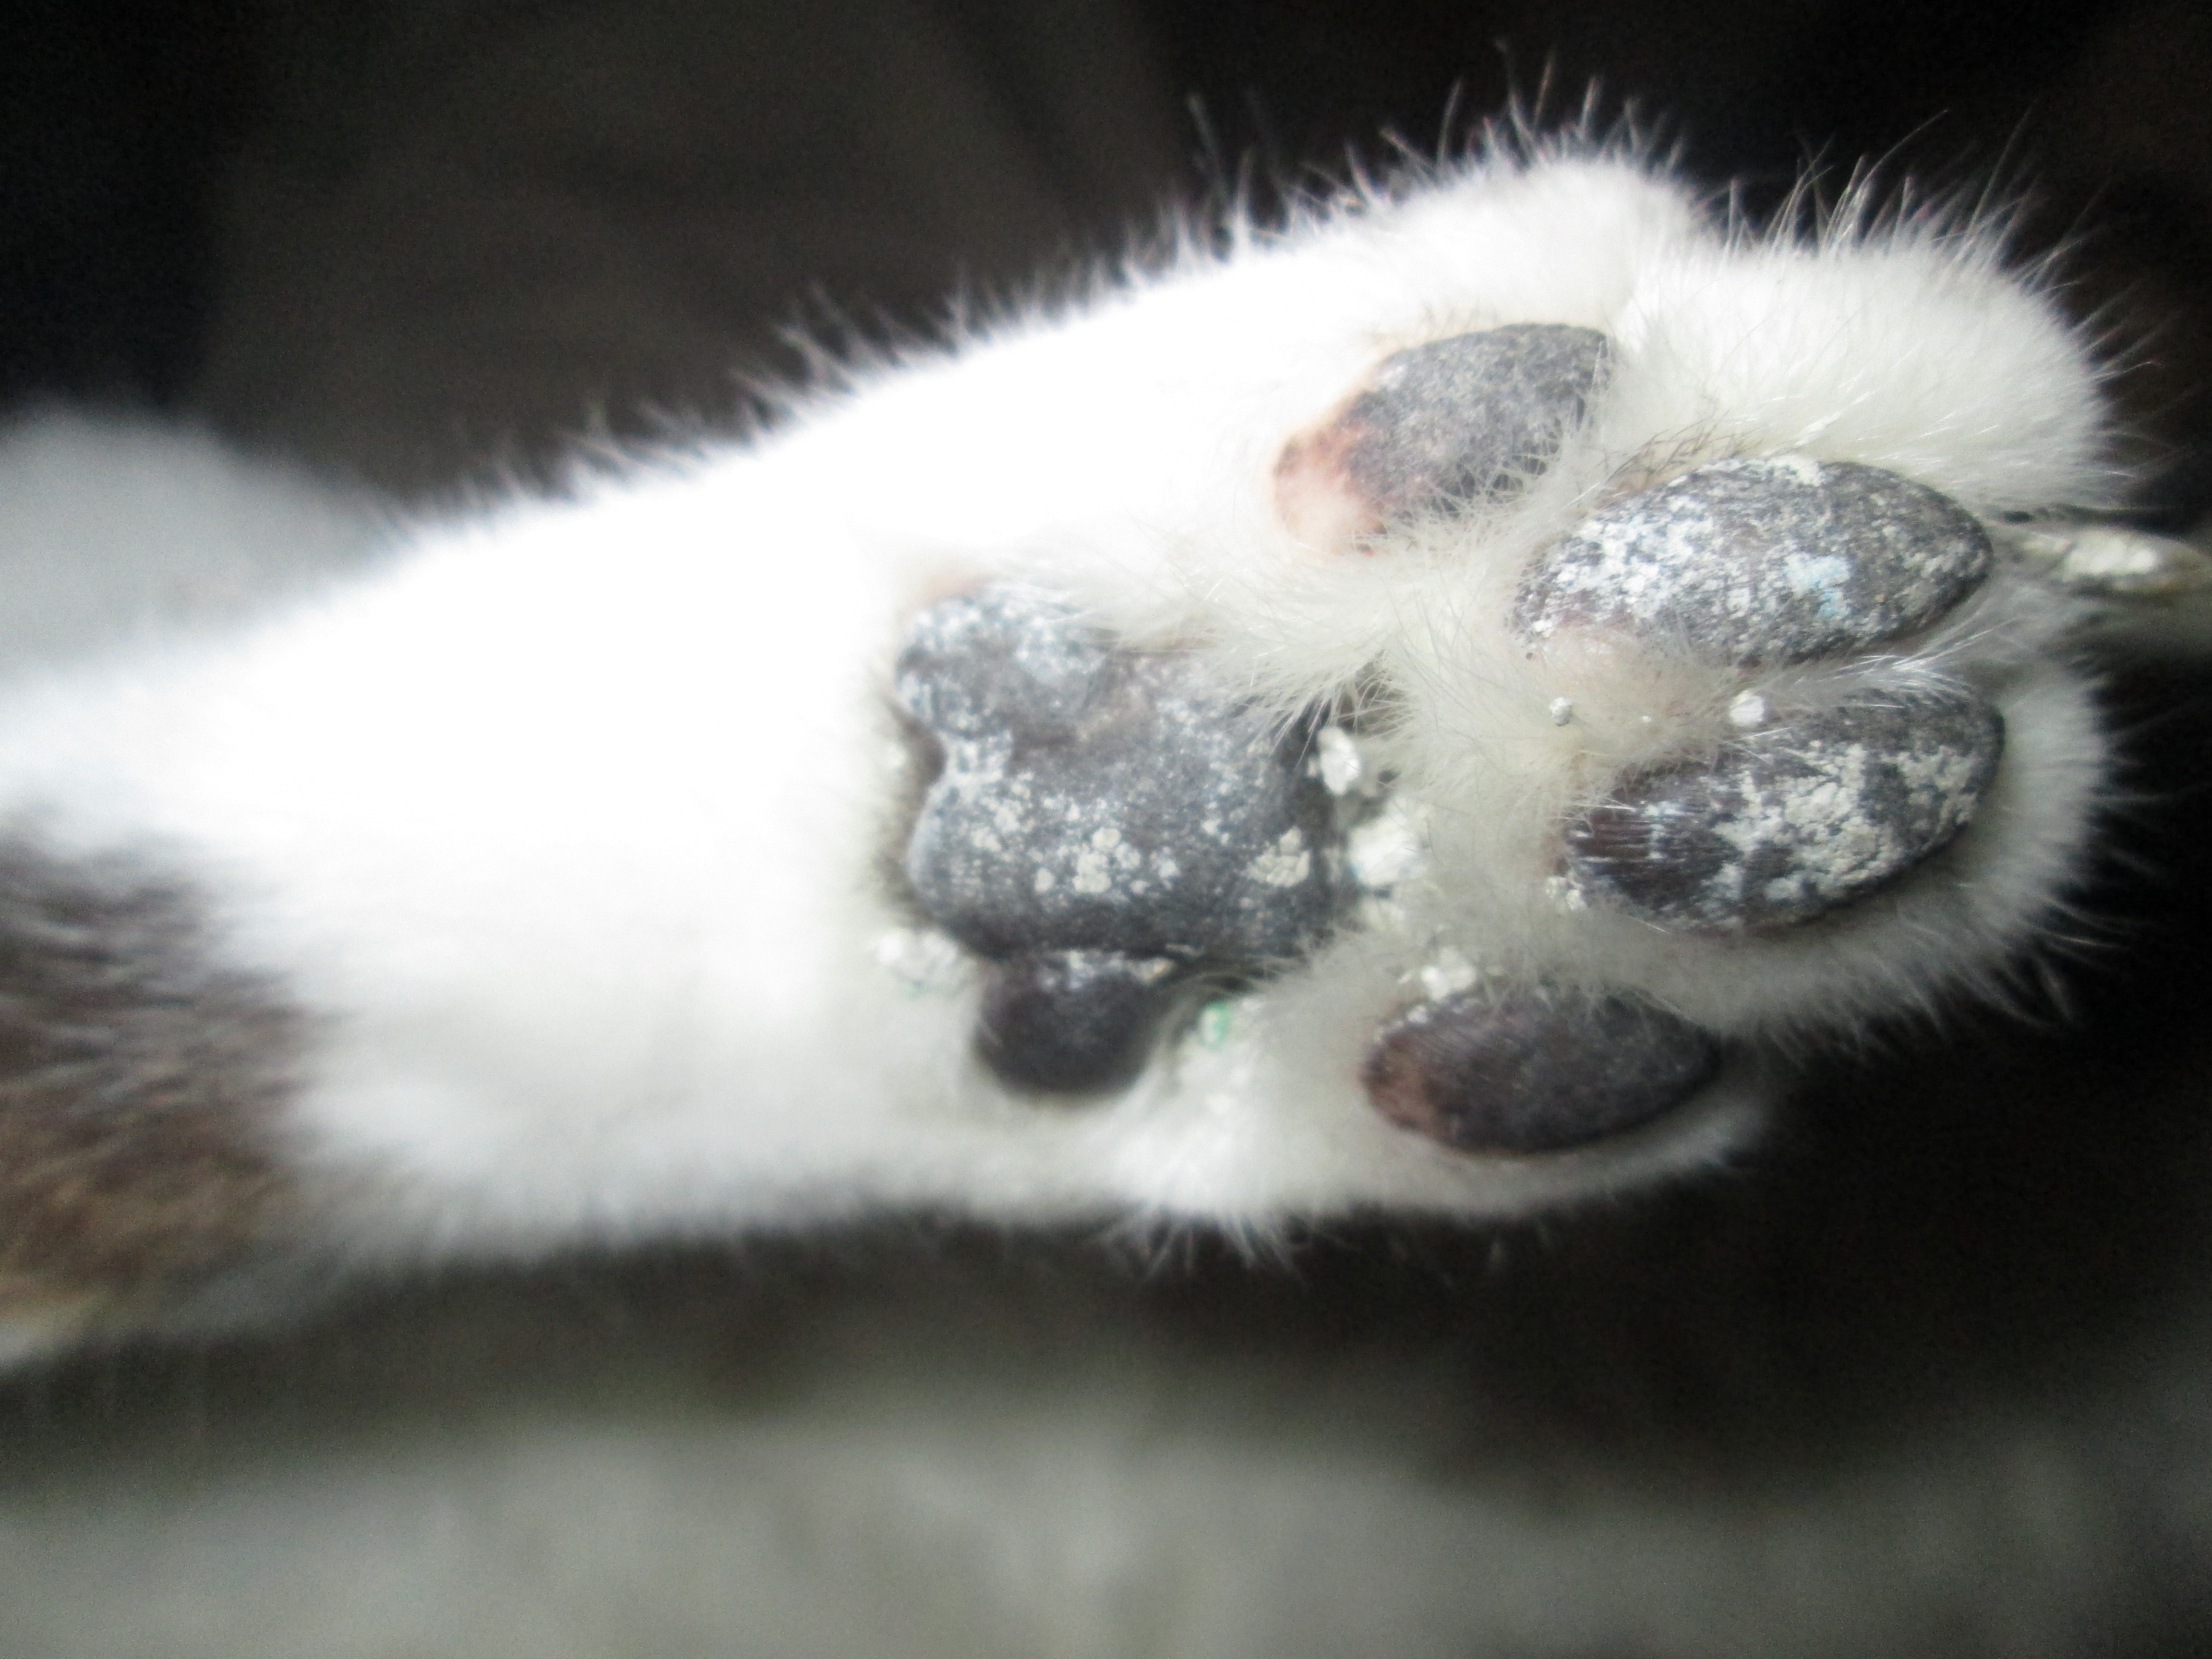 Something Growing On Cats Paw Thecatsite